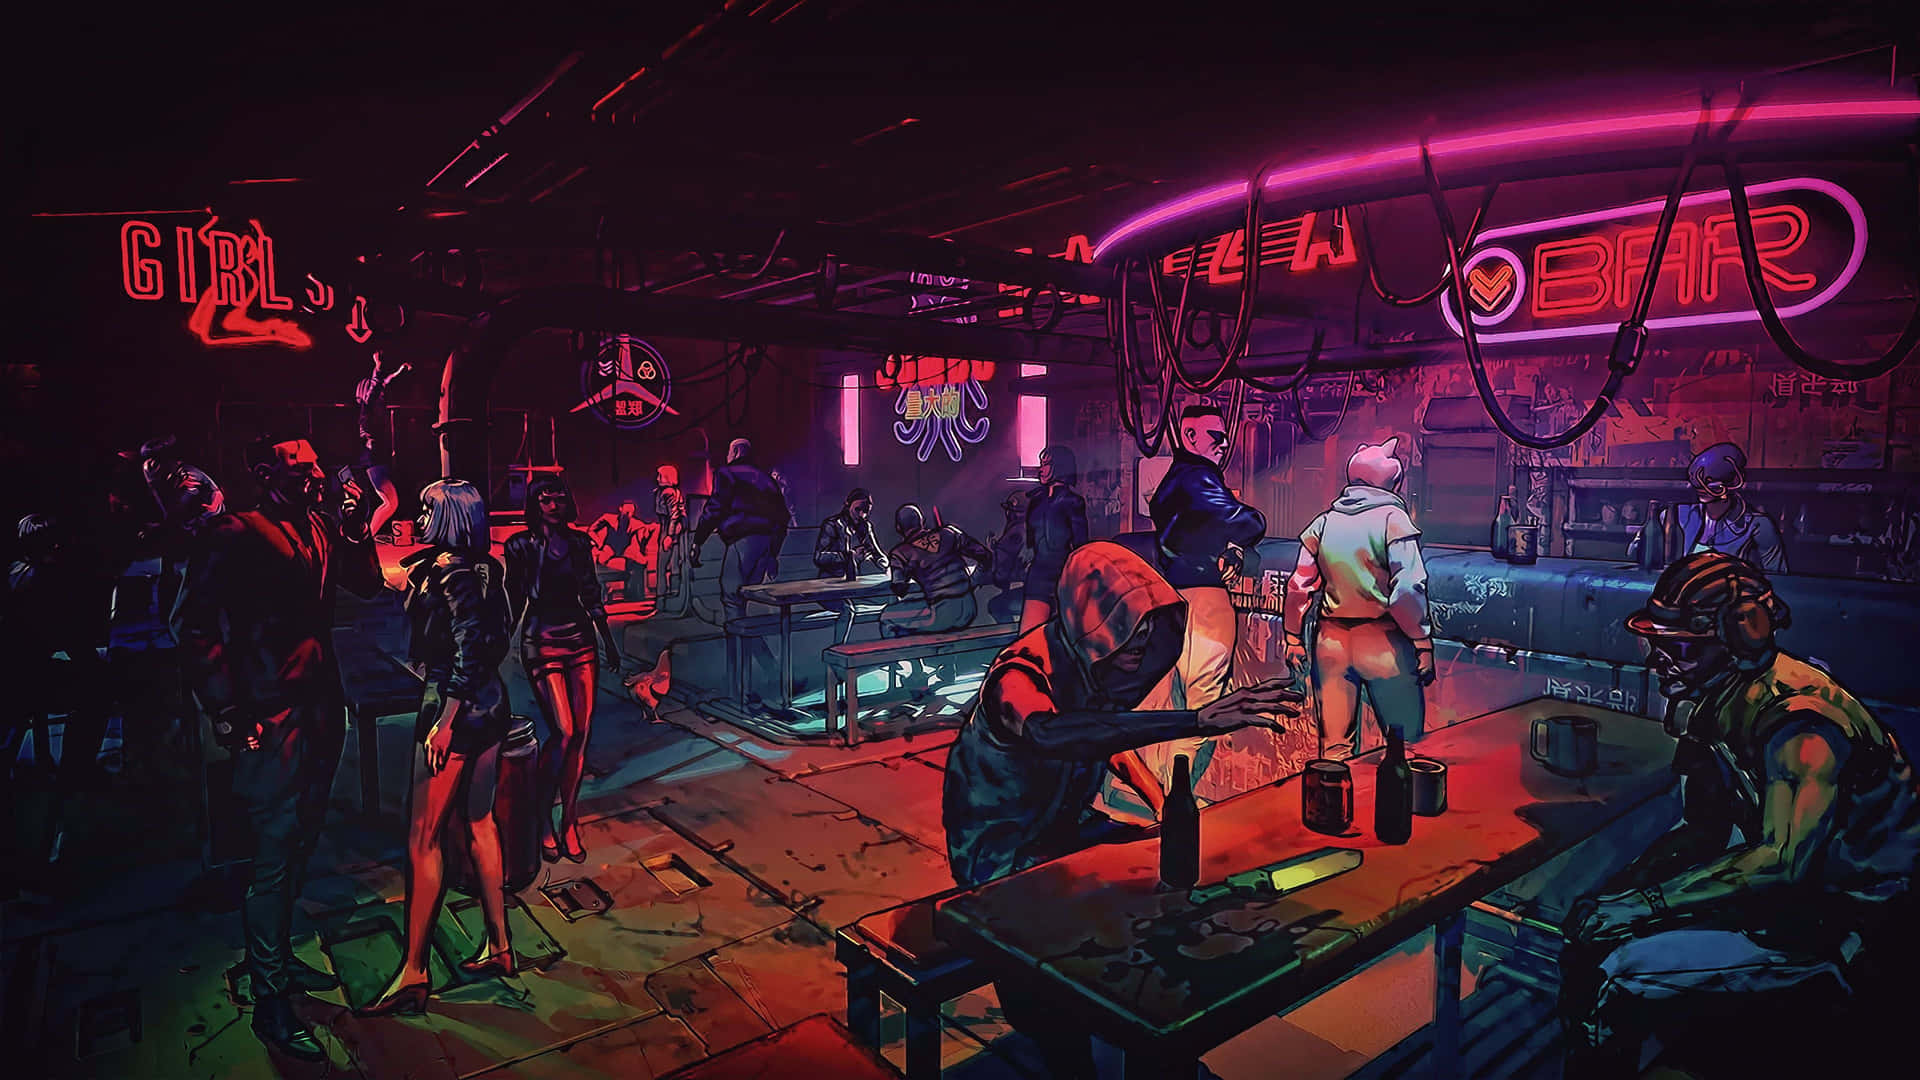 A Group Of People In A Bar With Neon Lights